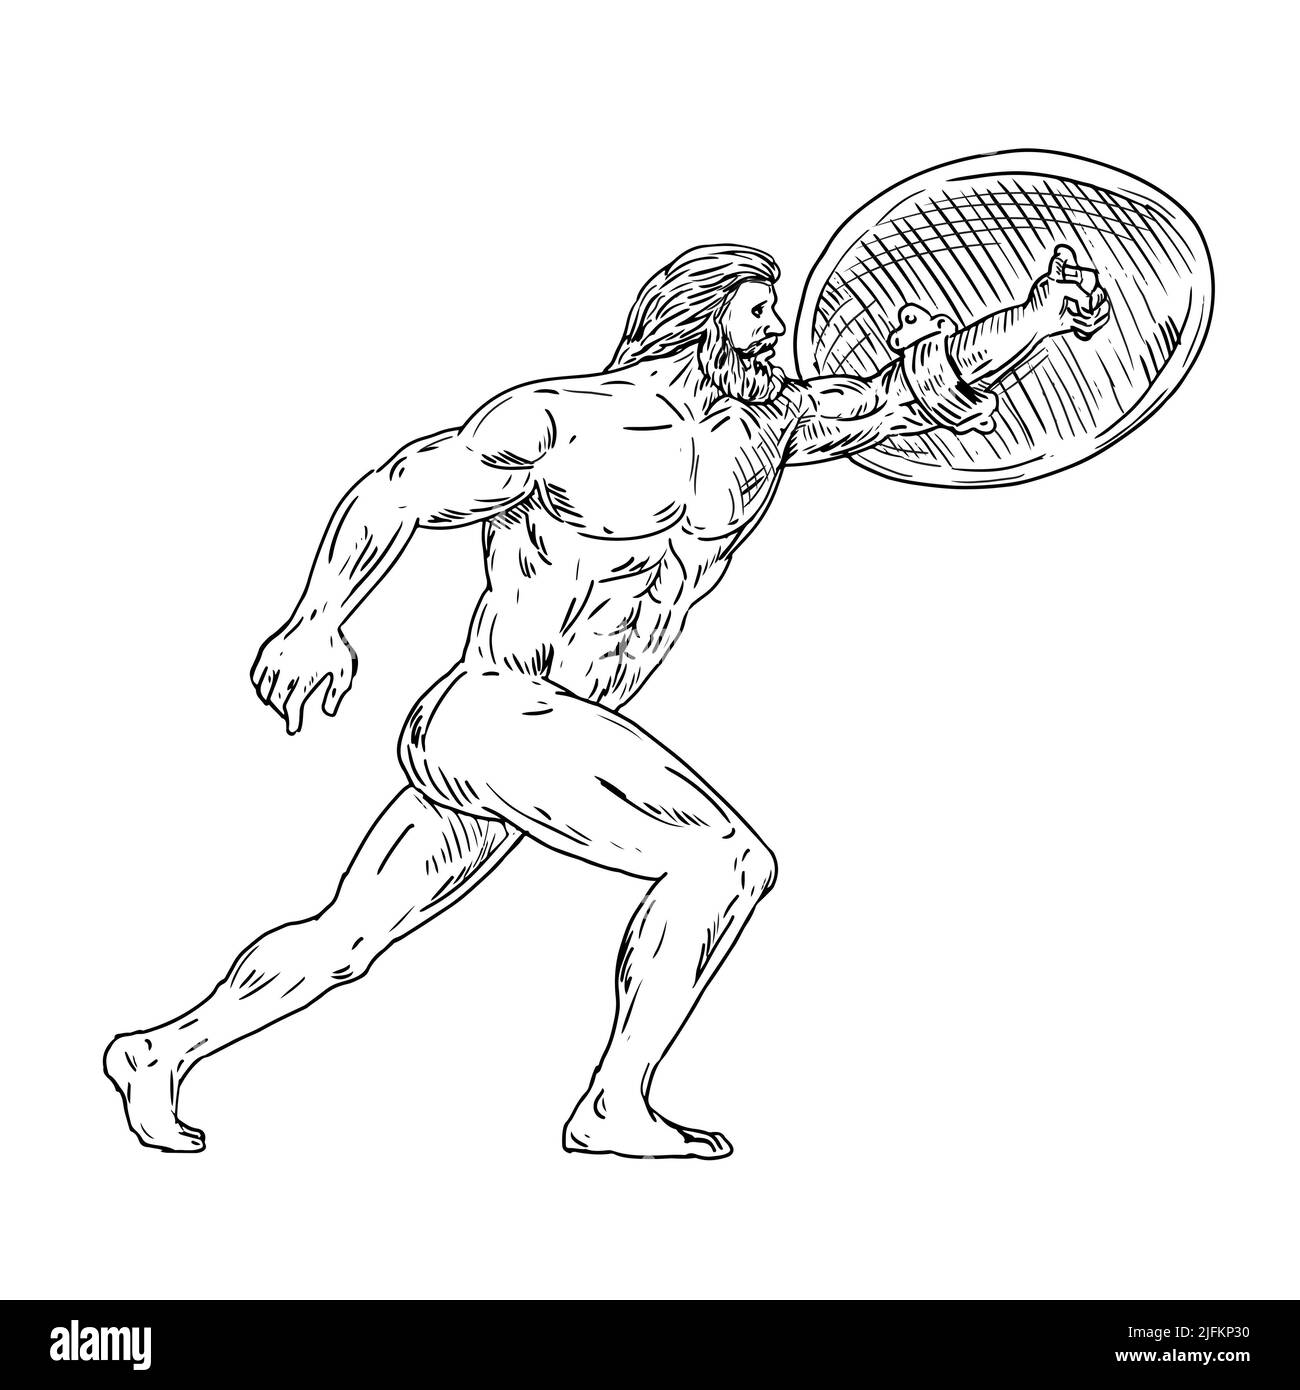 Drawing sketch style illustration of Heracles, a Greek divine hero equivalent to Roman hero and god, Hercules with shield and urginf forward done in Stock Photo